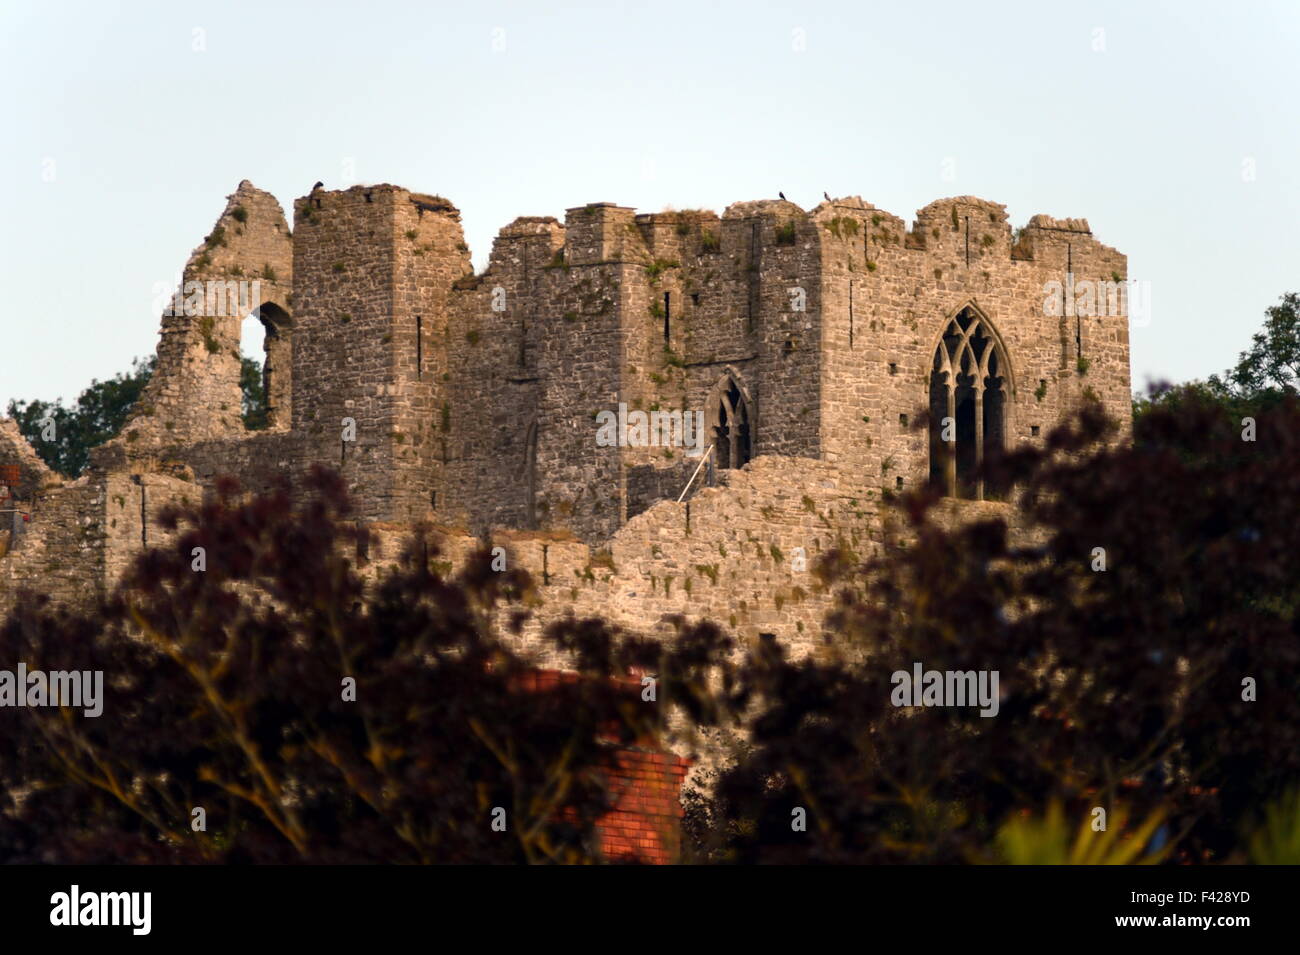 view of east face of Oystermouth castle with decorative arched windows, Mumbles, Gower, UK Stock Photo